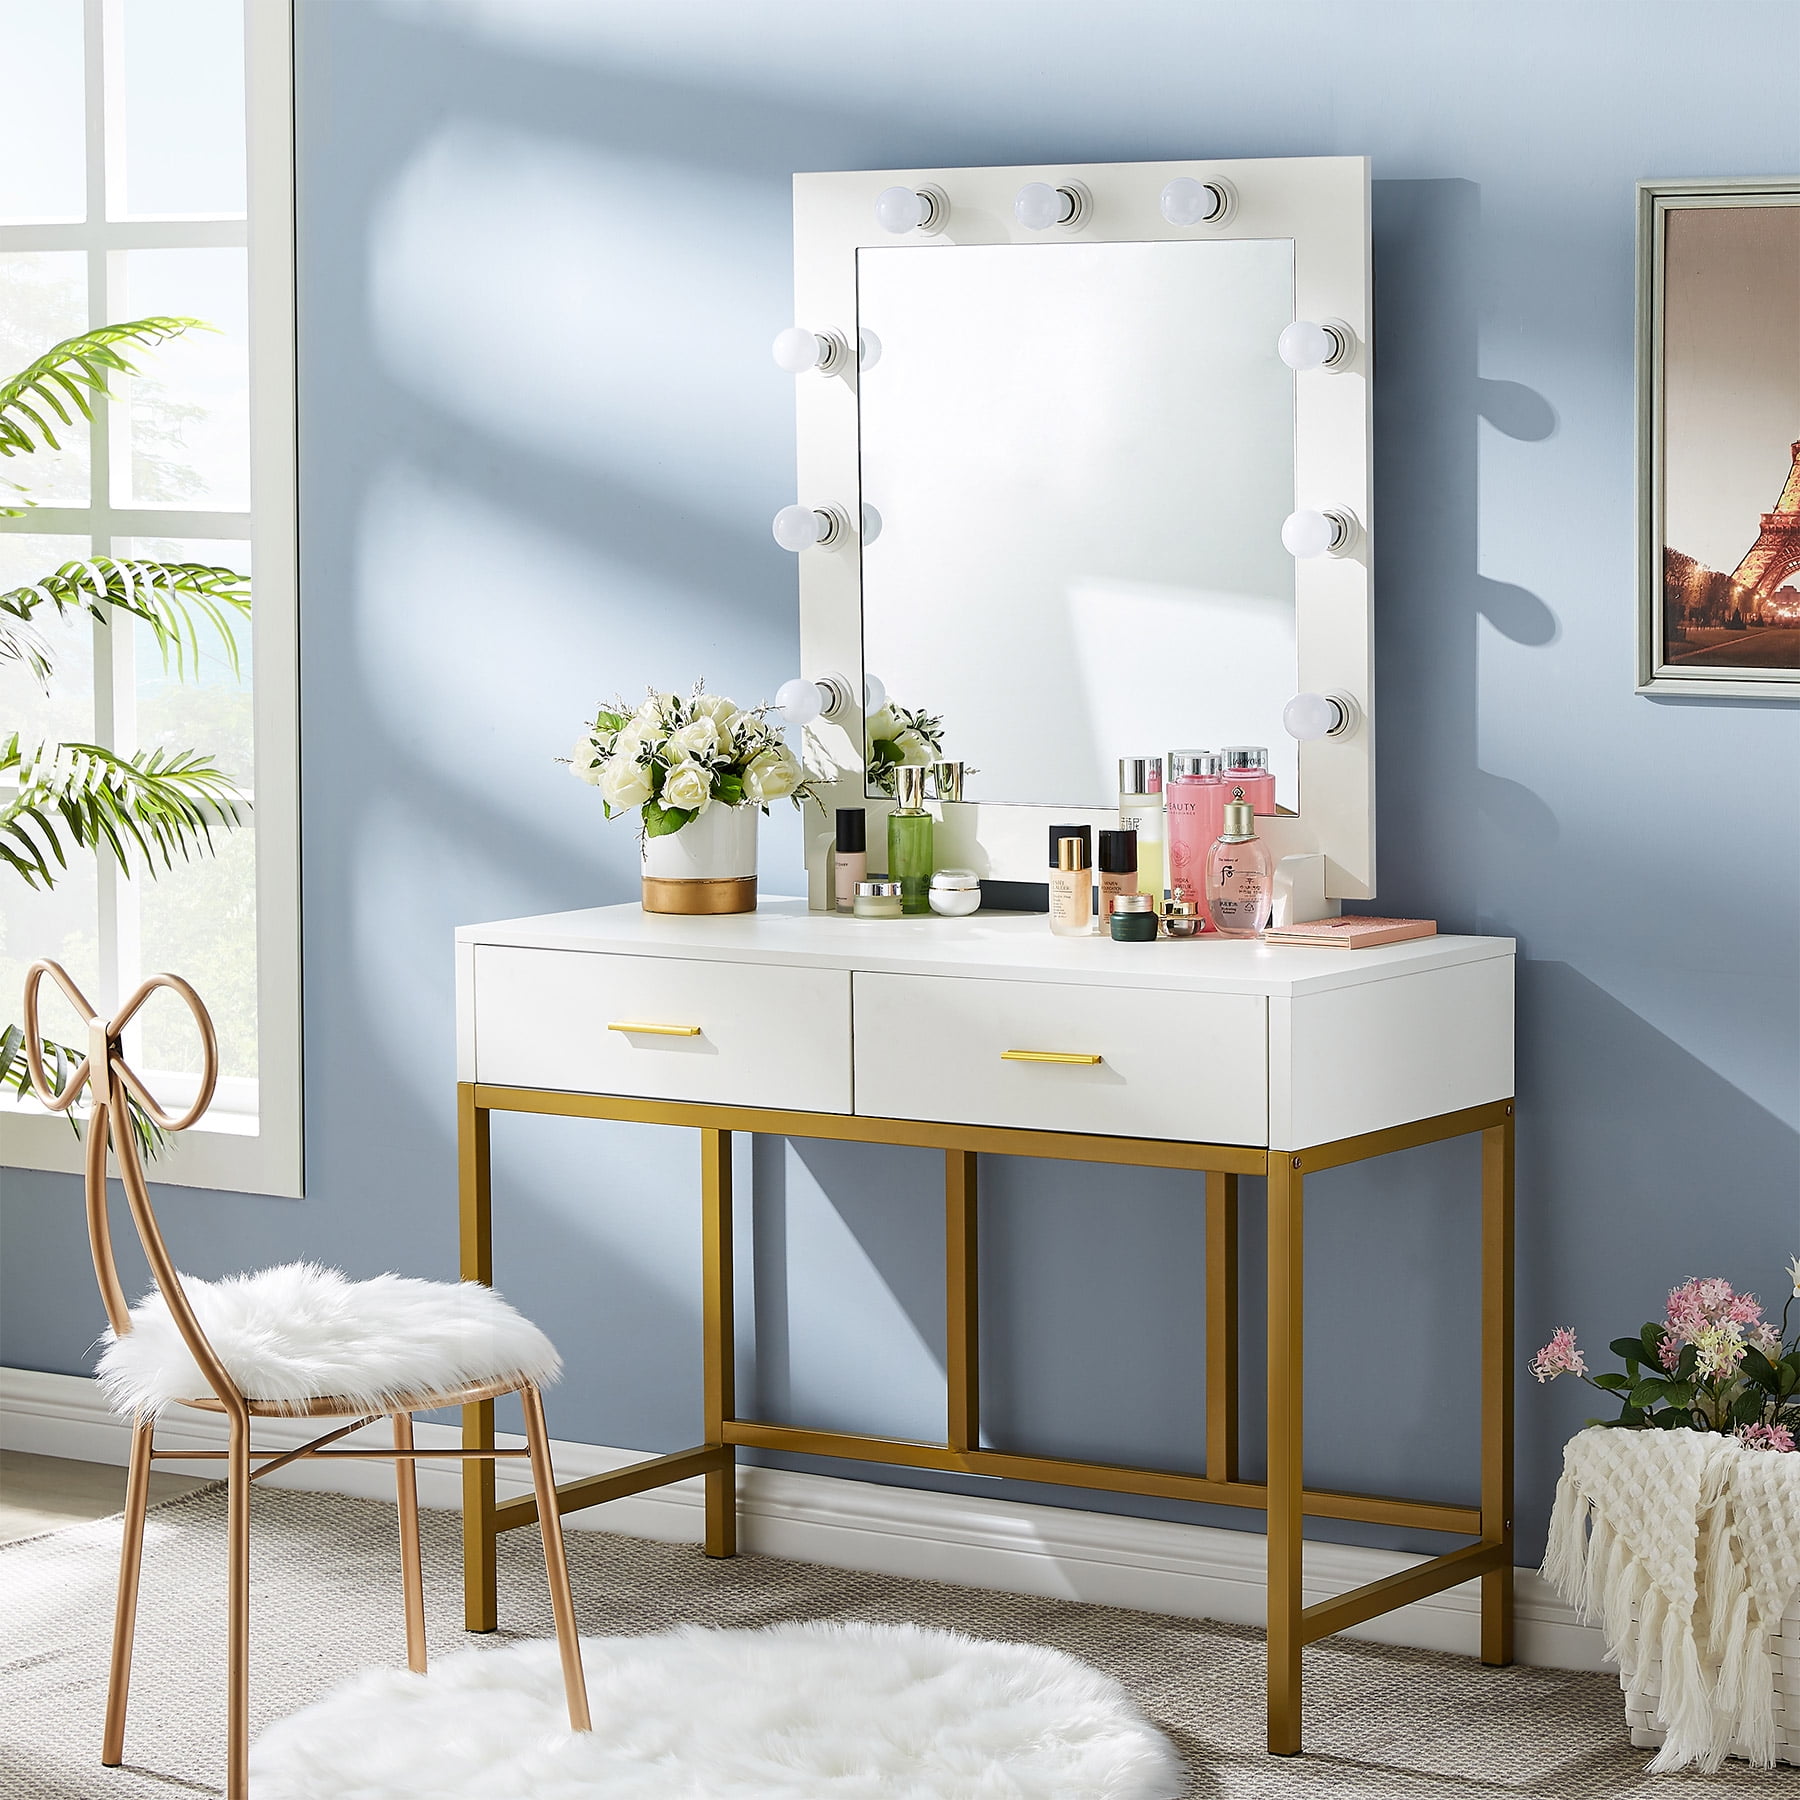 Details about   Modern Lighted Makeup Vanity Table 3 Mirrors,4 Drawers & Padded Stool White+Gold 